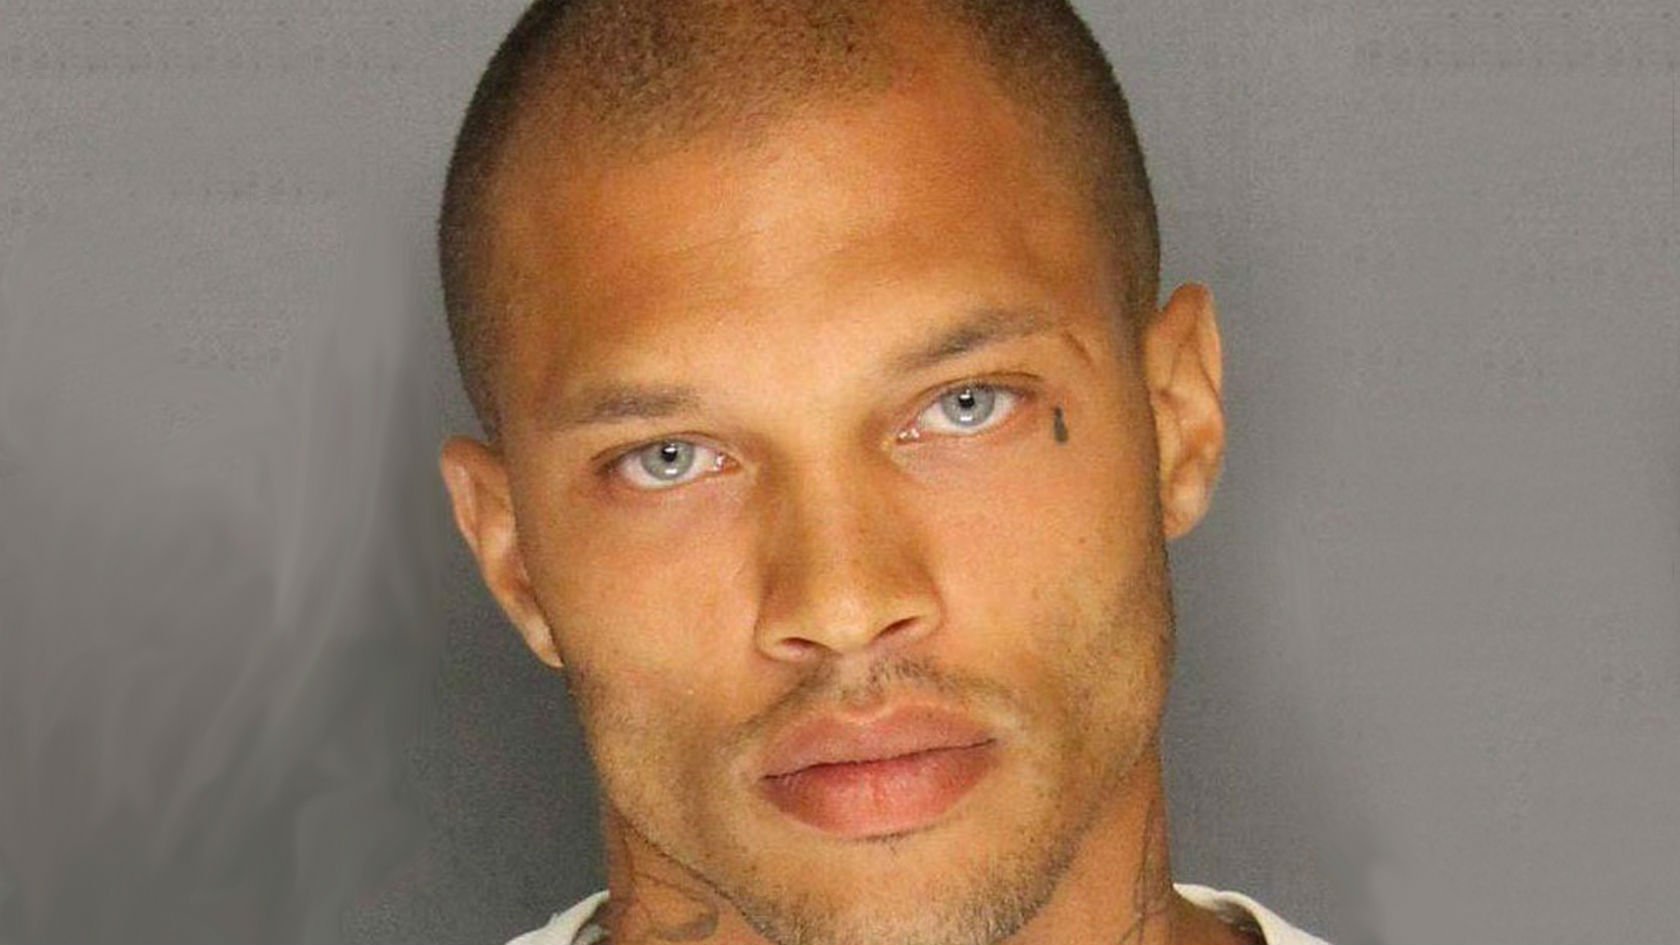 That 'Hot Mugshot Guy' Jeremy Meeks Has Shared His First Modelling